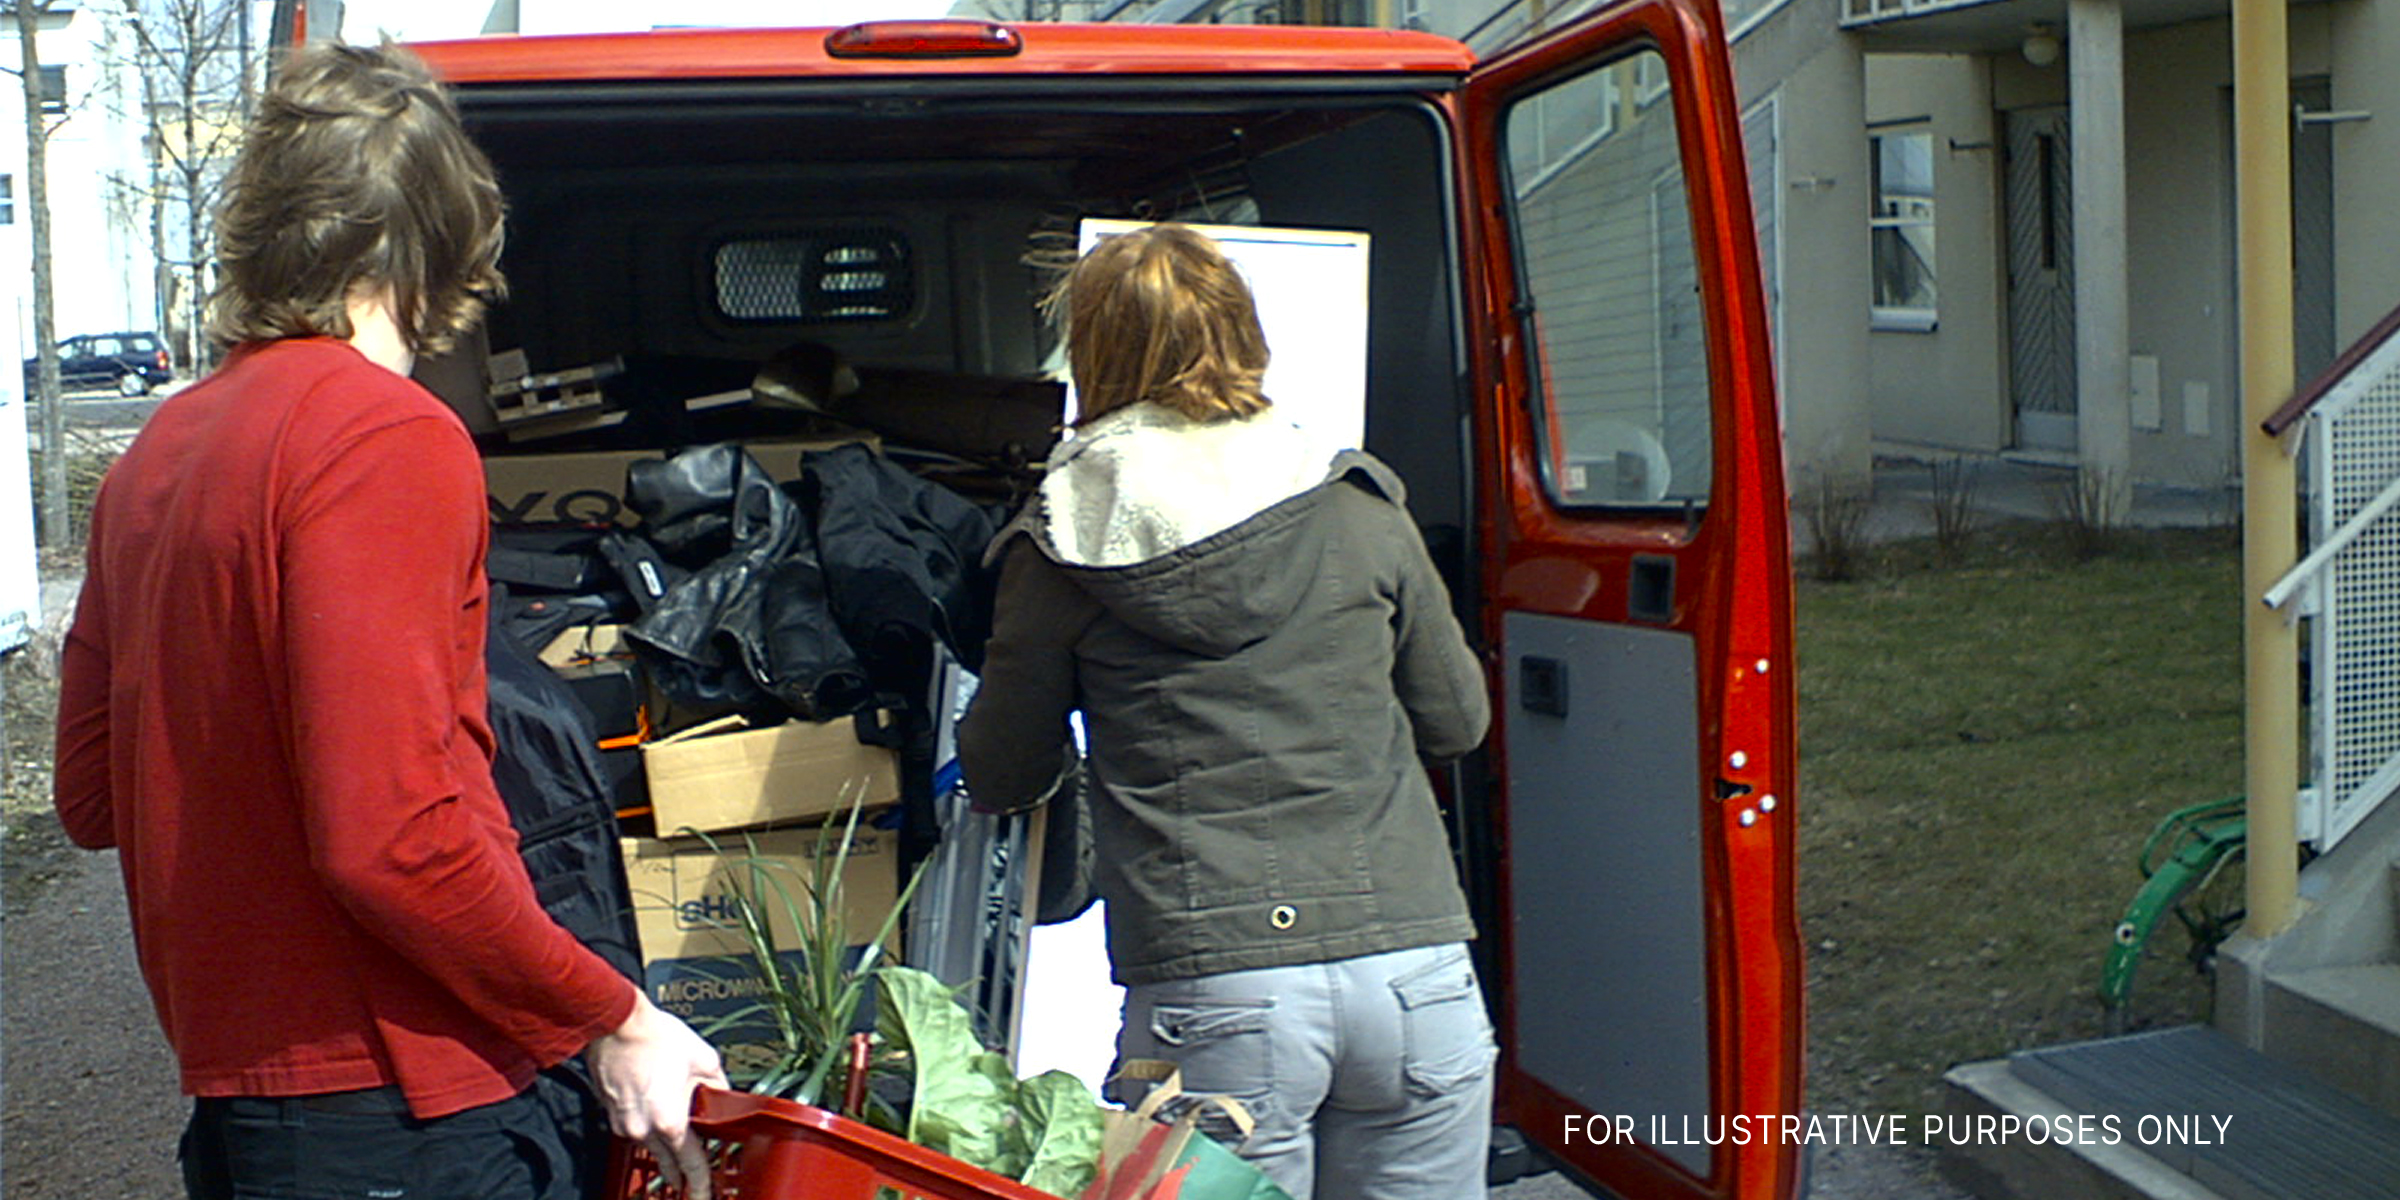 Couple moving their belongings | Source: Flickr